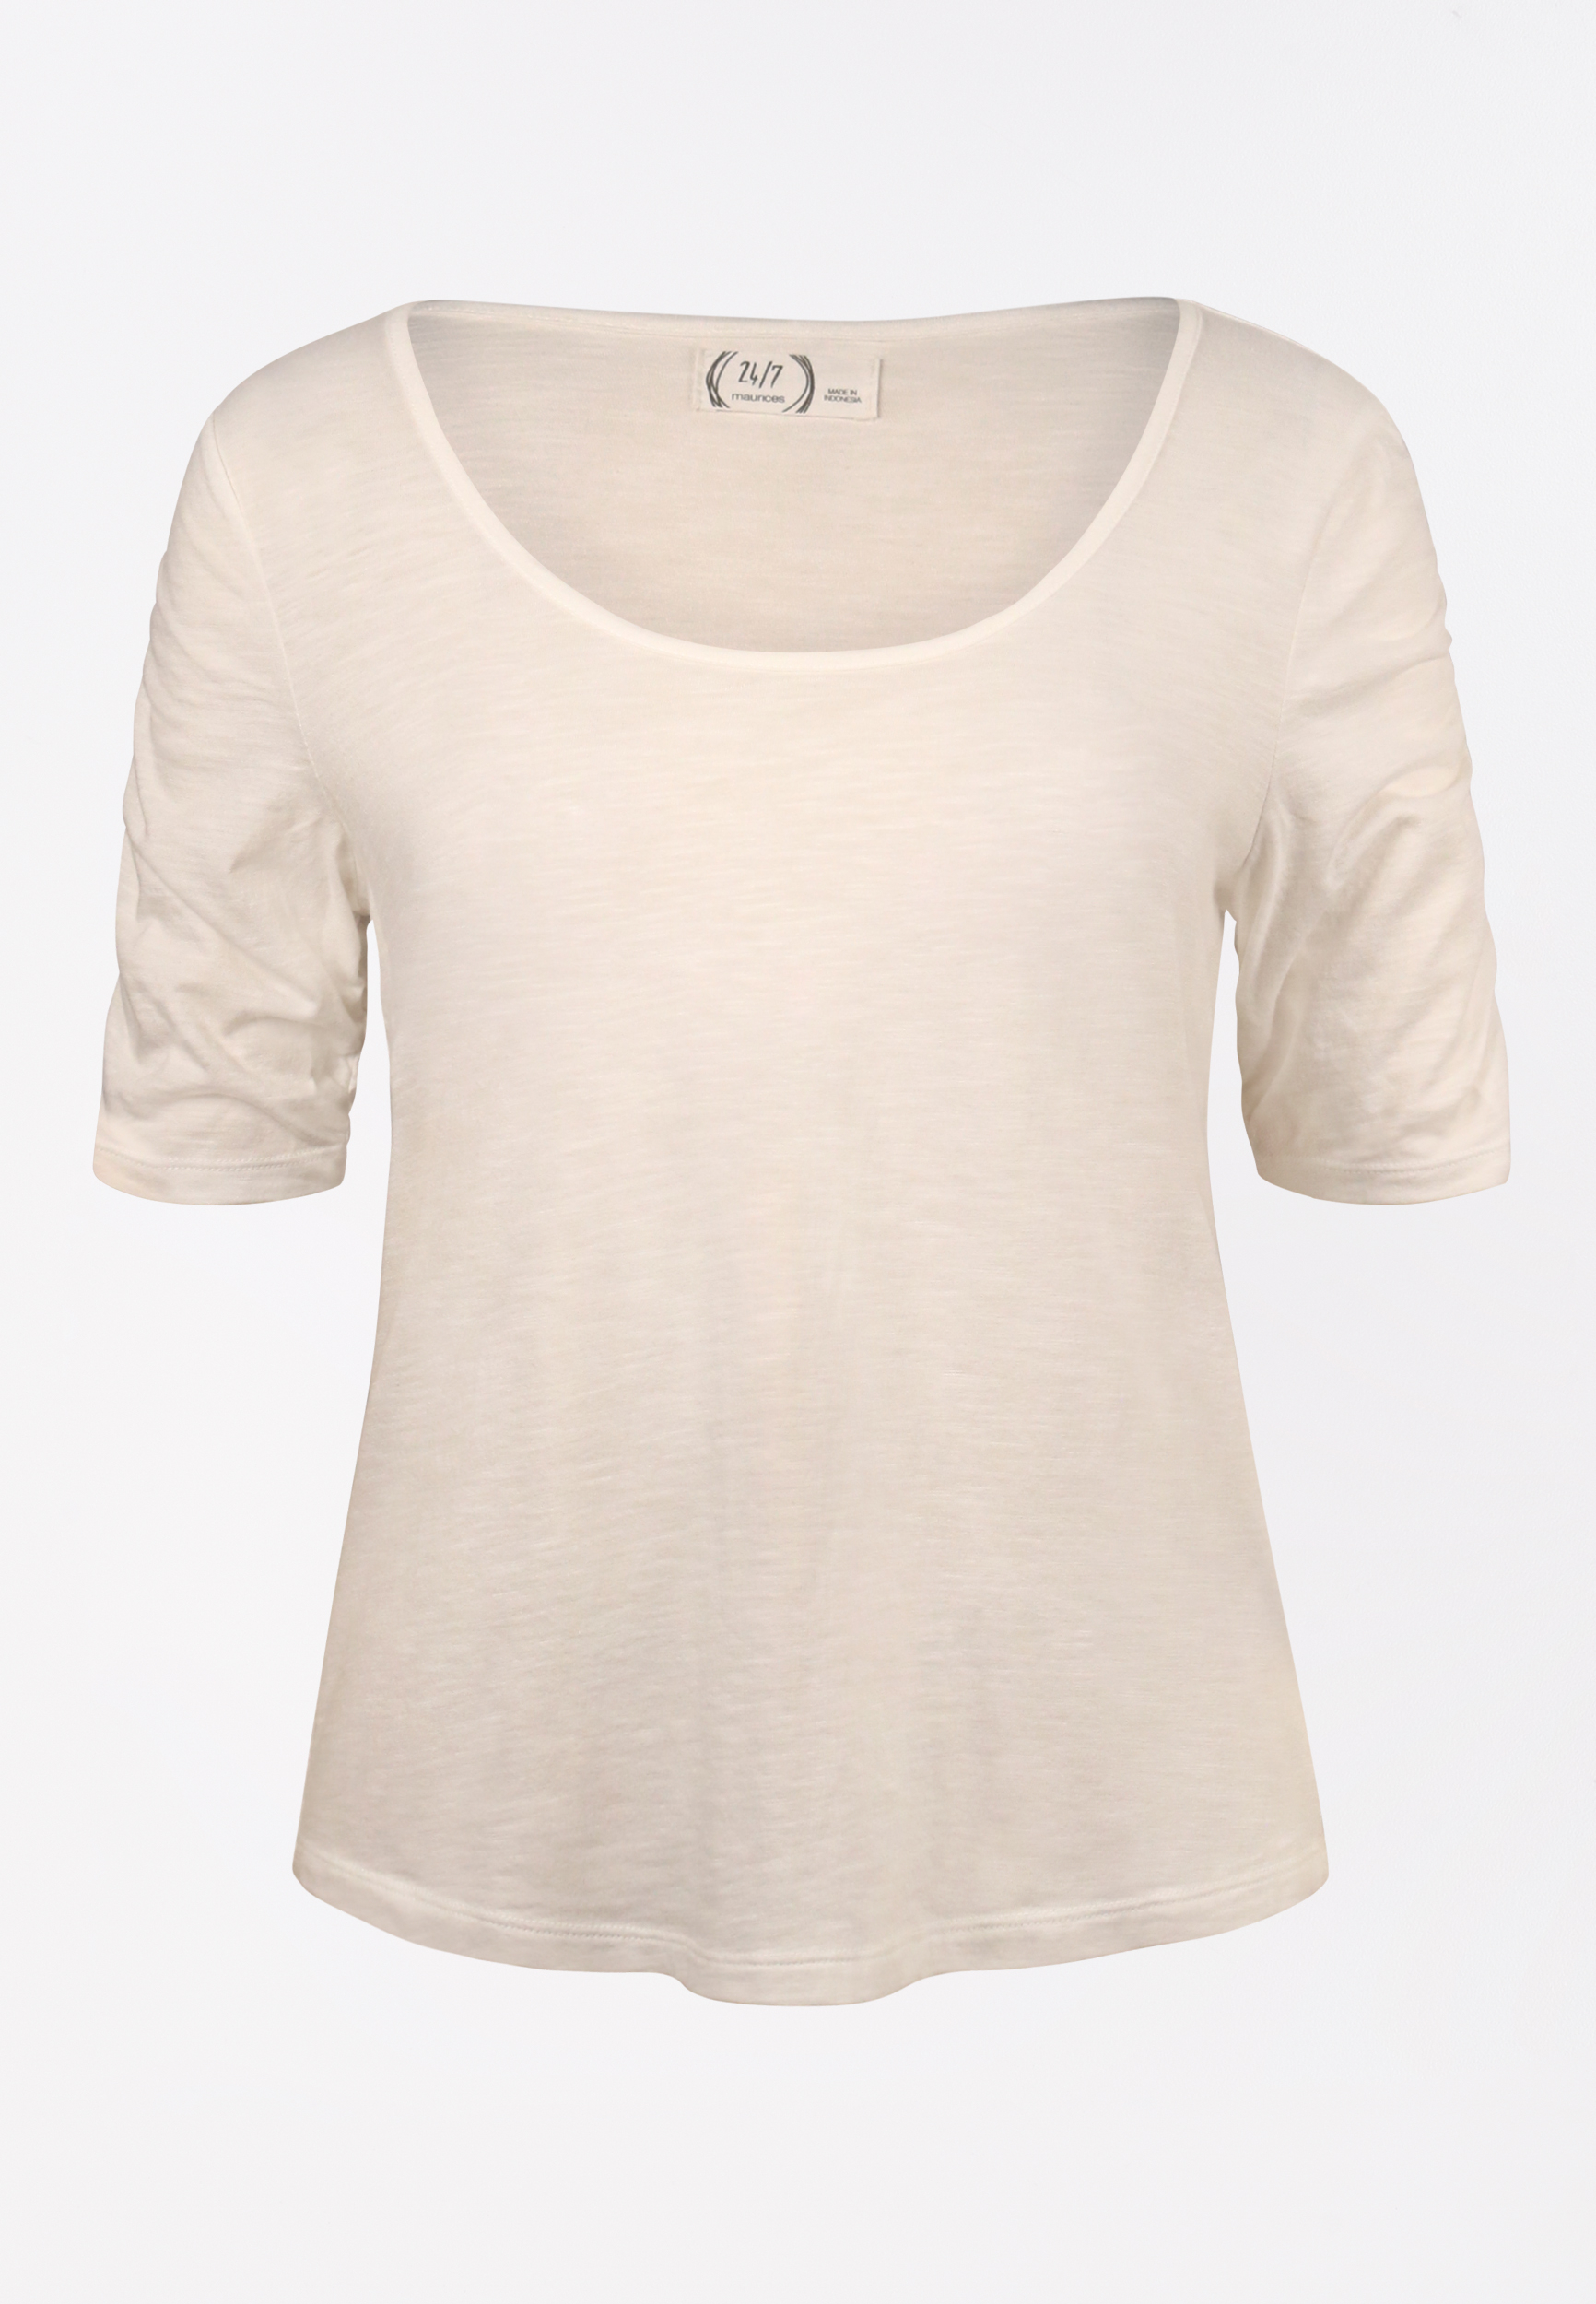 New Arrival Tops: Trendy Sweaters, Blouses, Tanks & More | maurices